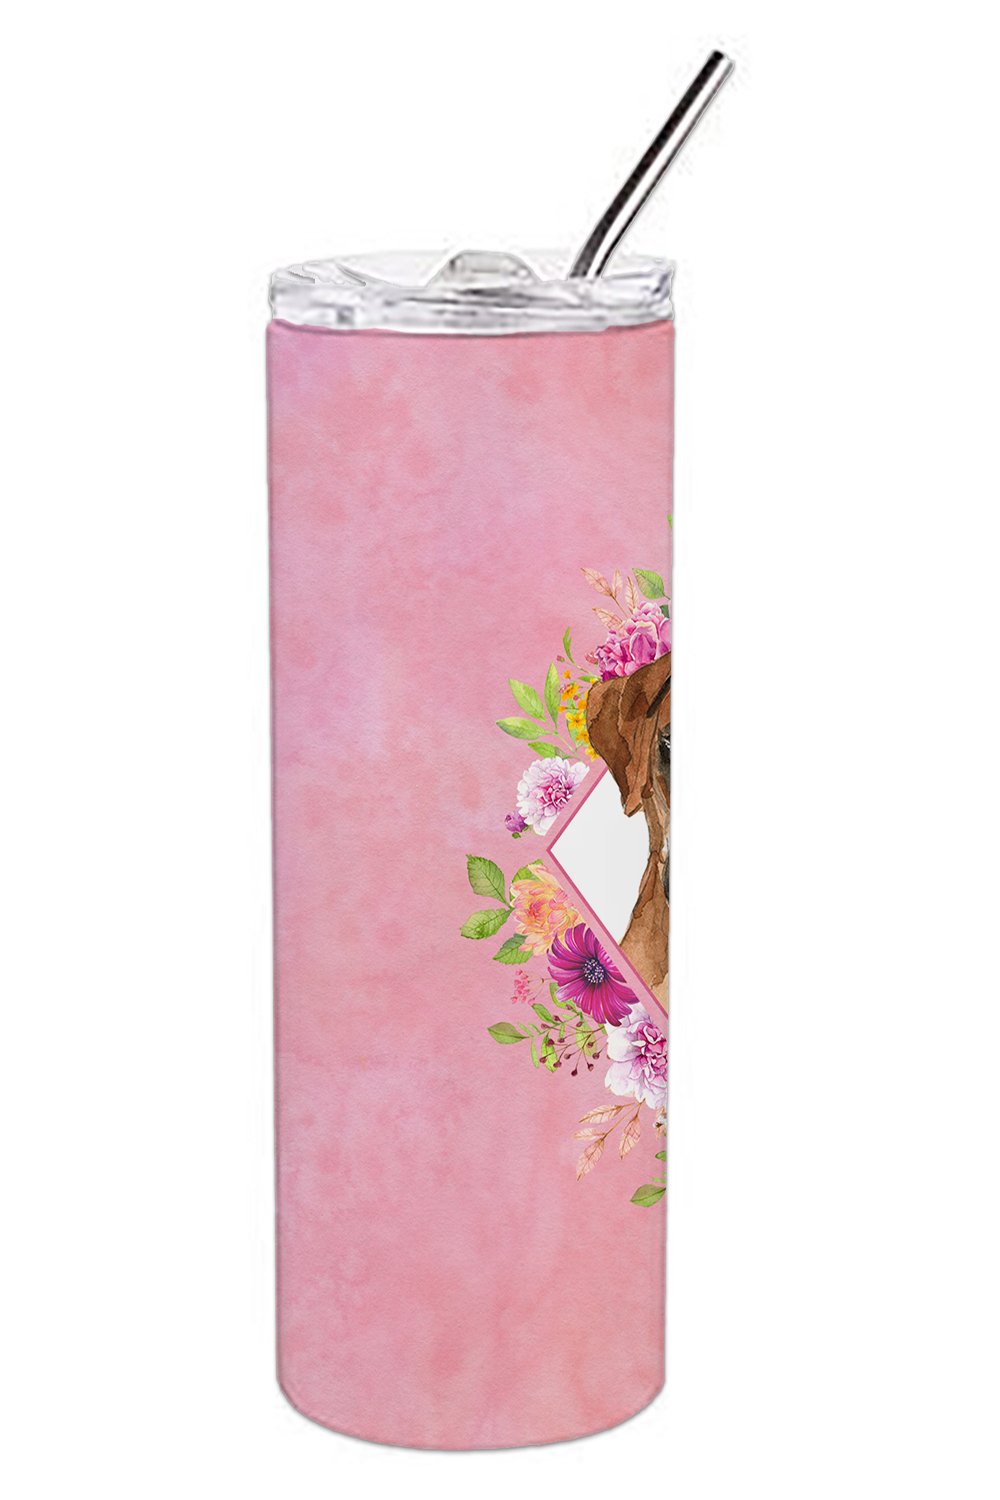 Boxer Pink Flowers Double Walled Stainless Steel 20 oz Skinny Tumbler CK4255TBL20 by Caroline's Treasures